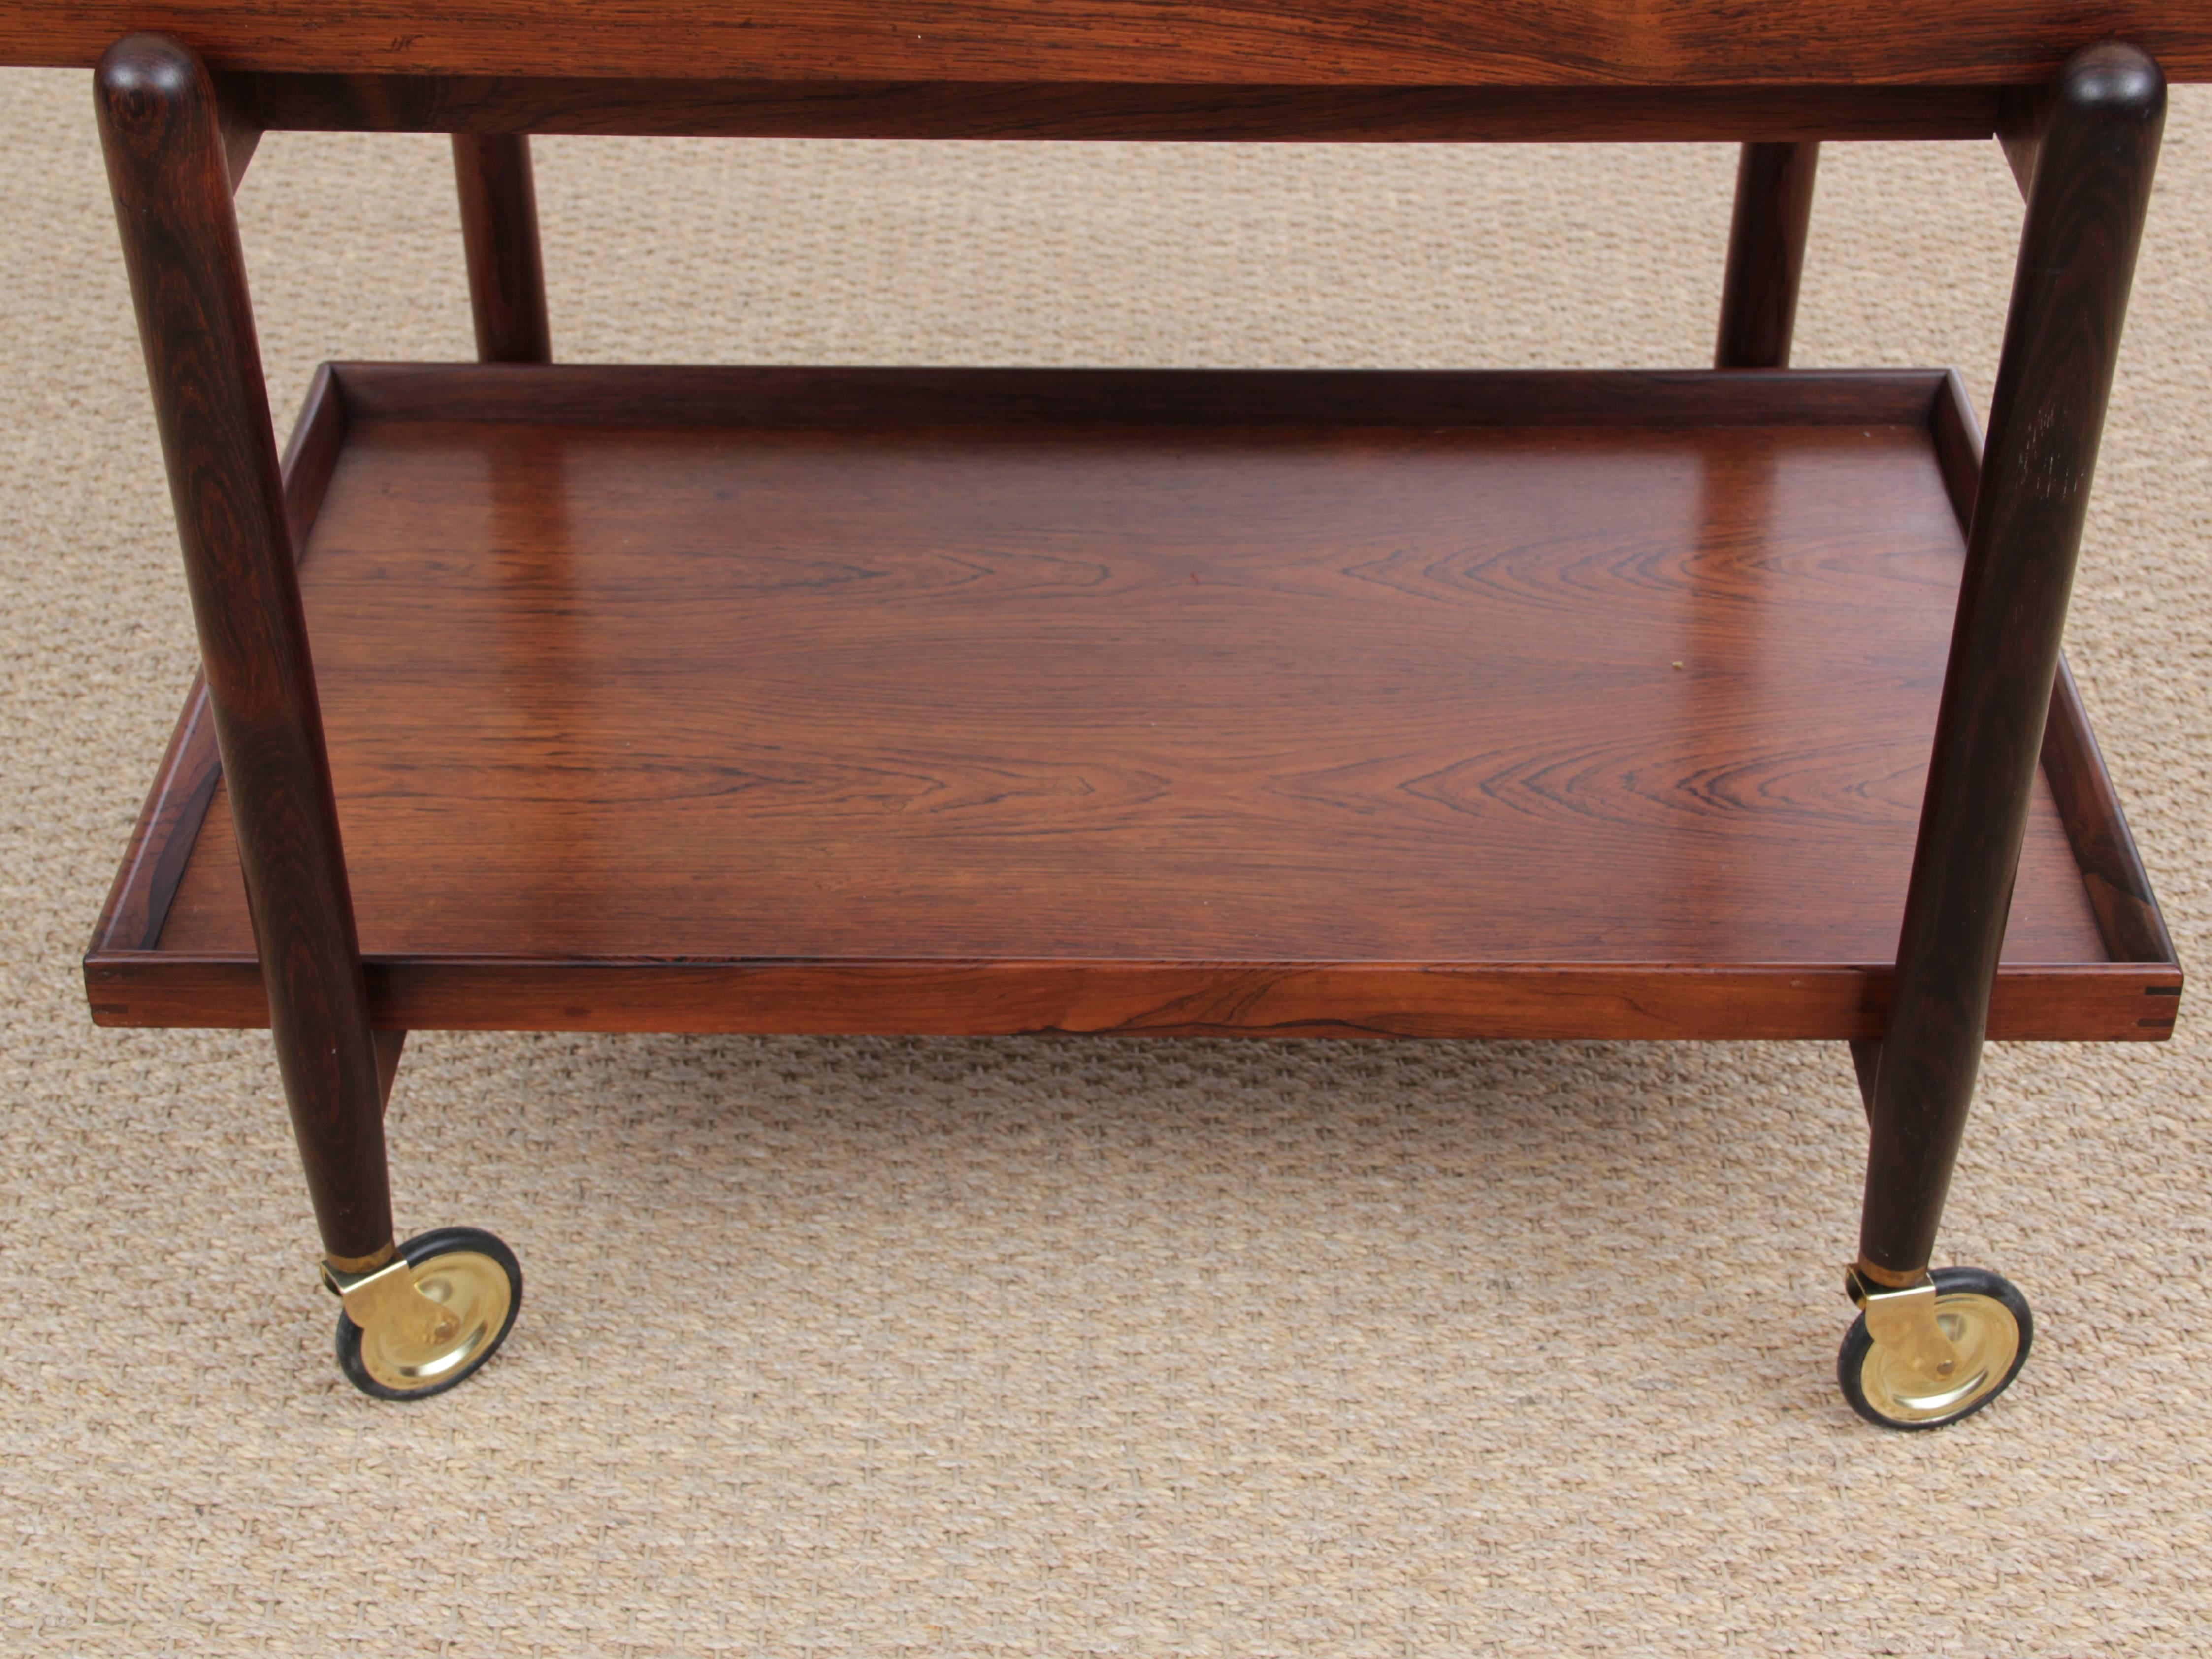 Midcentury Danish serving cart in rosewood by Poul Hundevad with extendable tray.